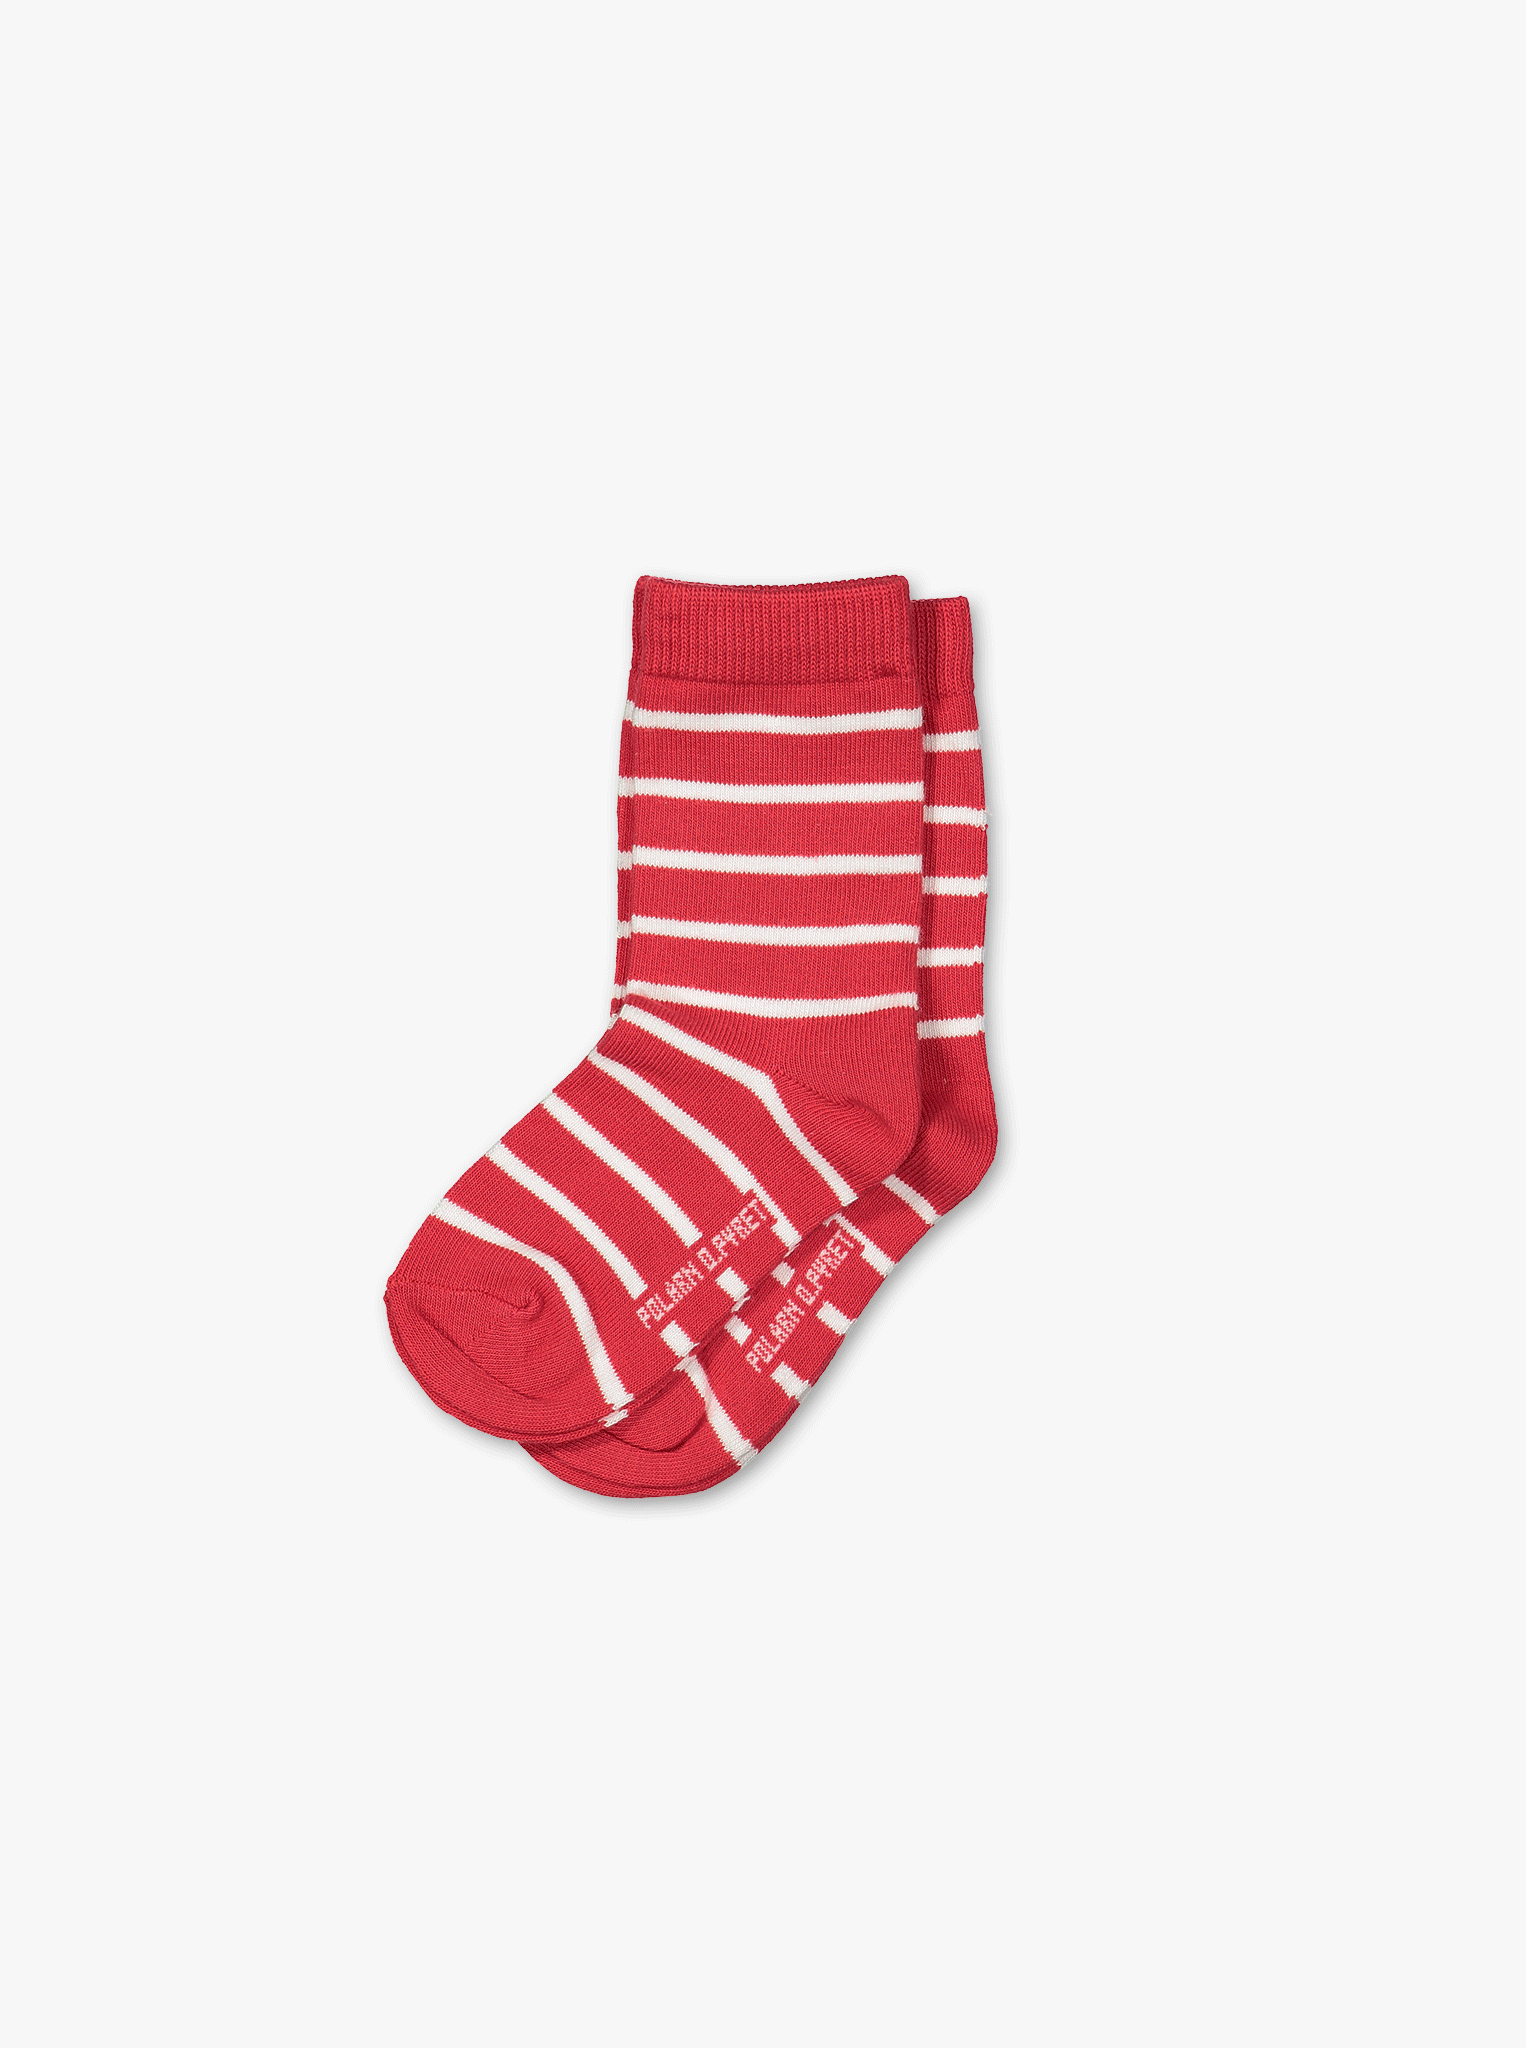 2 Pack Kids Socks red and white striped, organic cotton comfortable polarn o. pyret